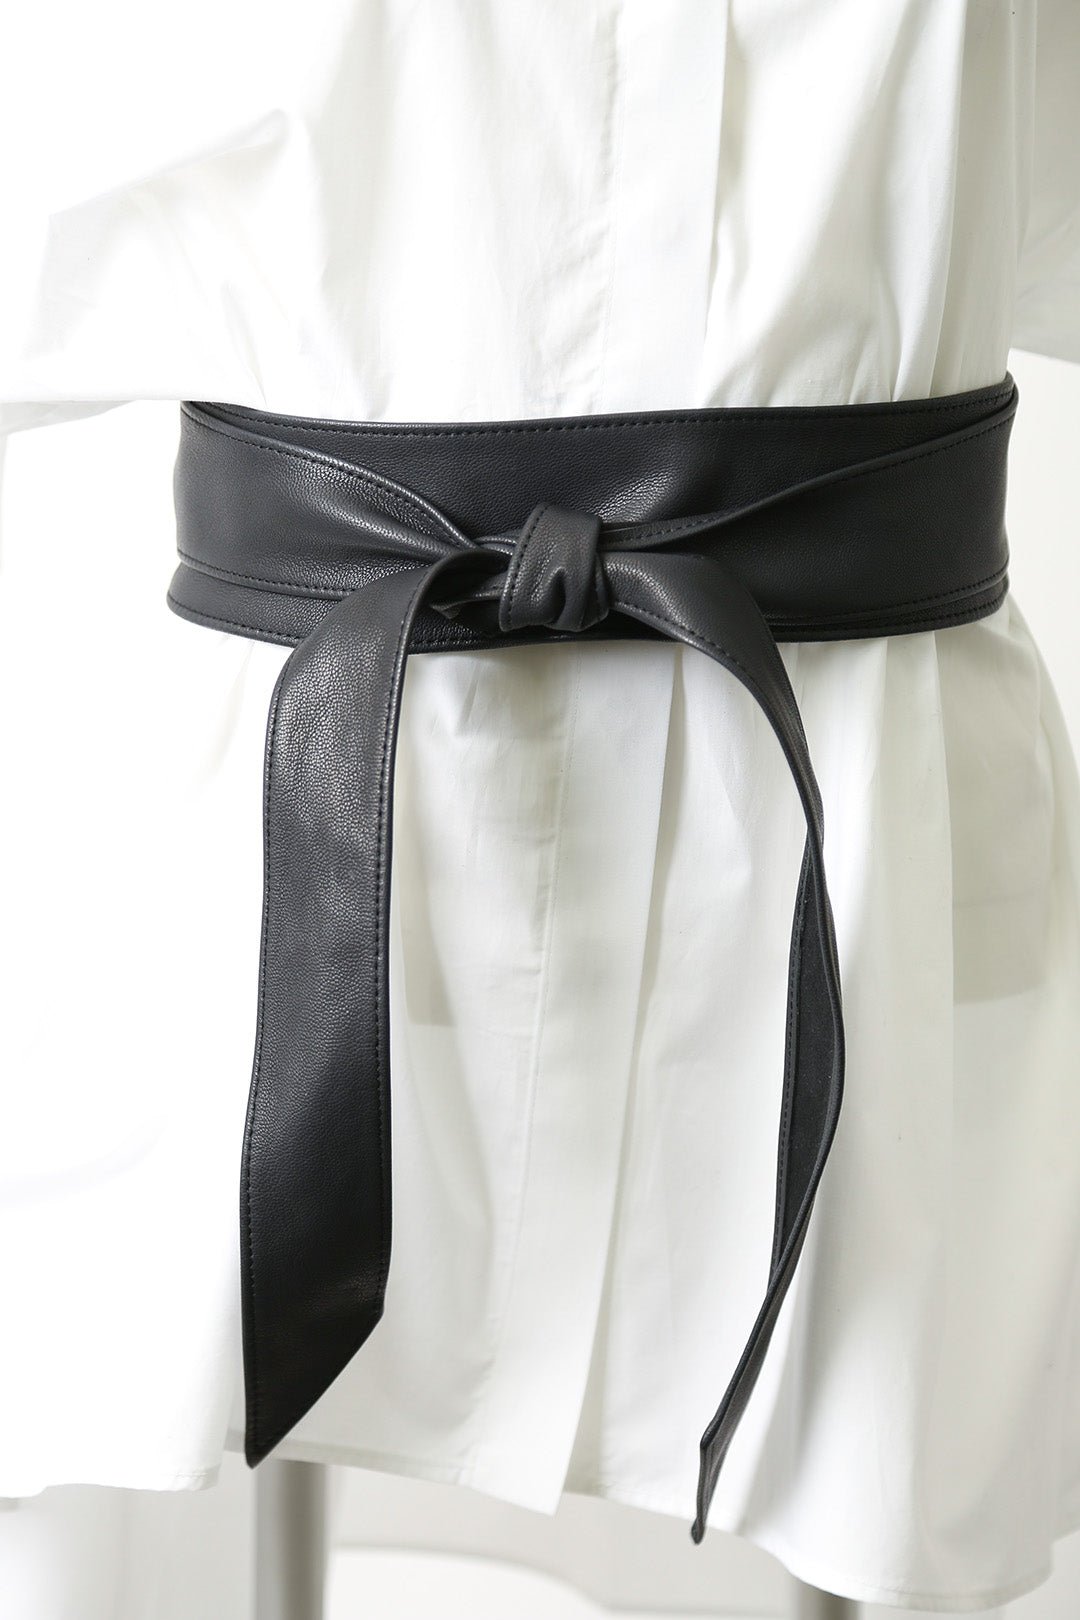 MATINO KIMONO BELT IN LEATHER OR SUEDE - Jarbo